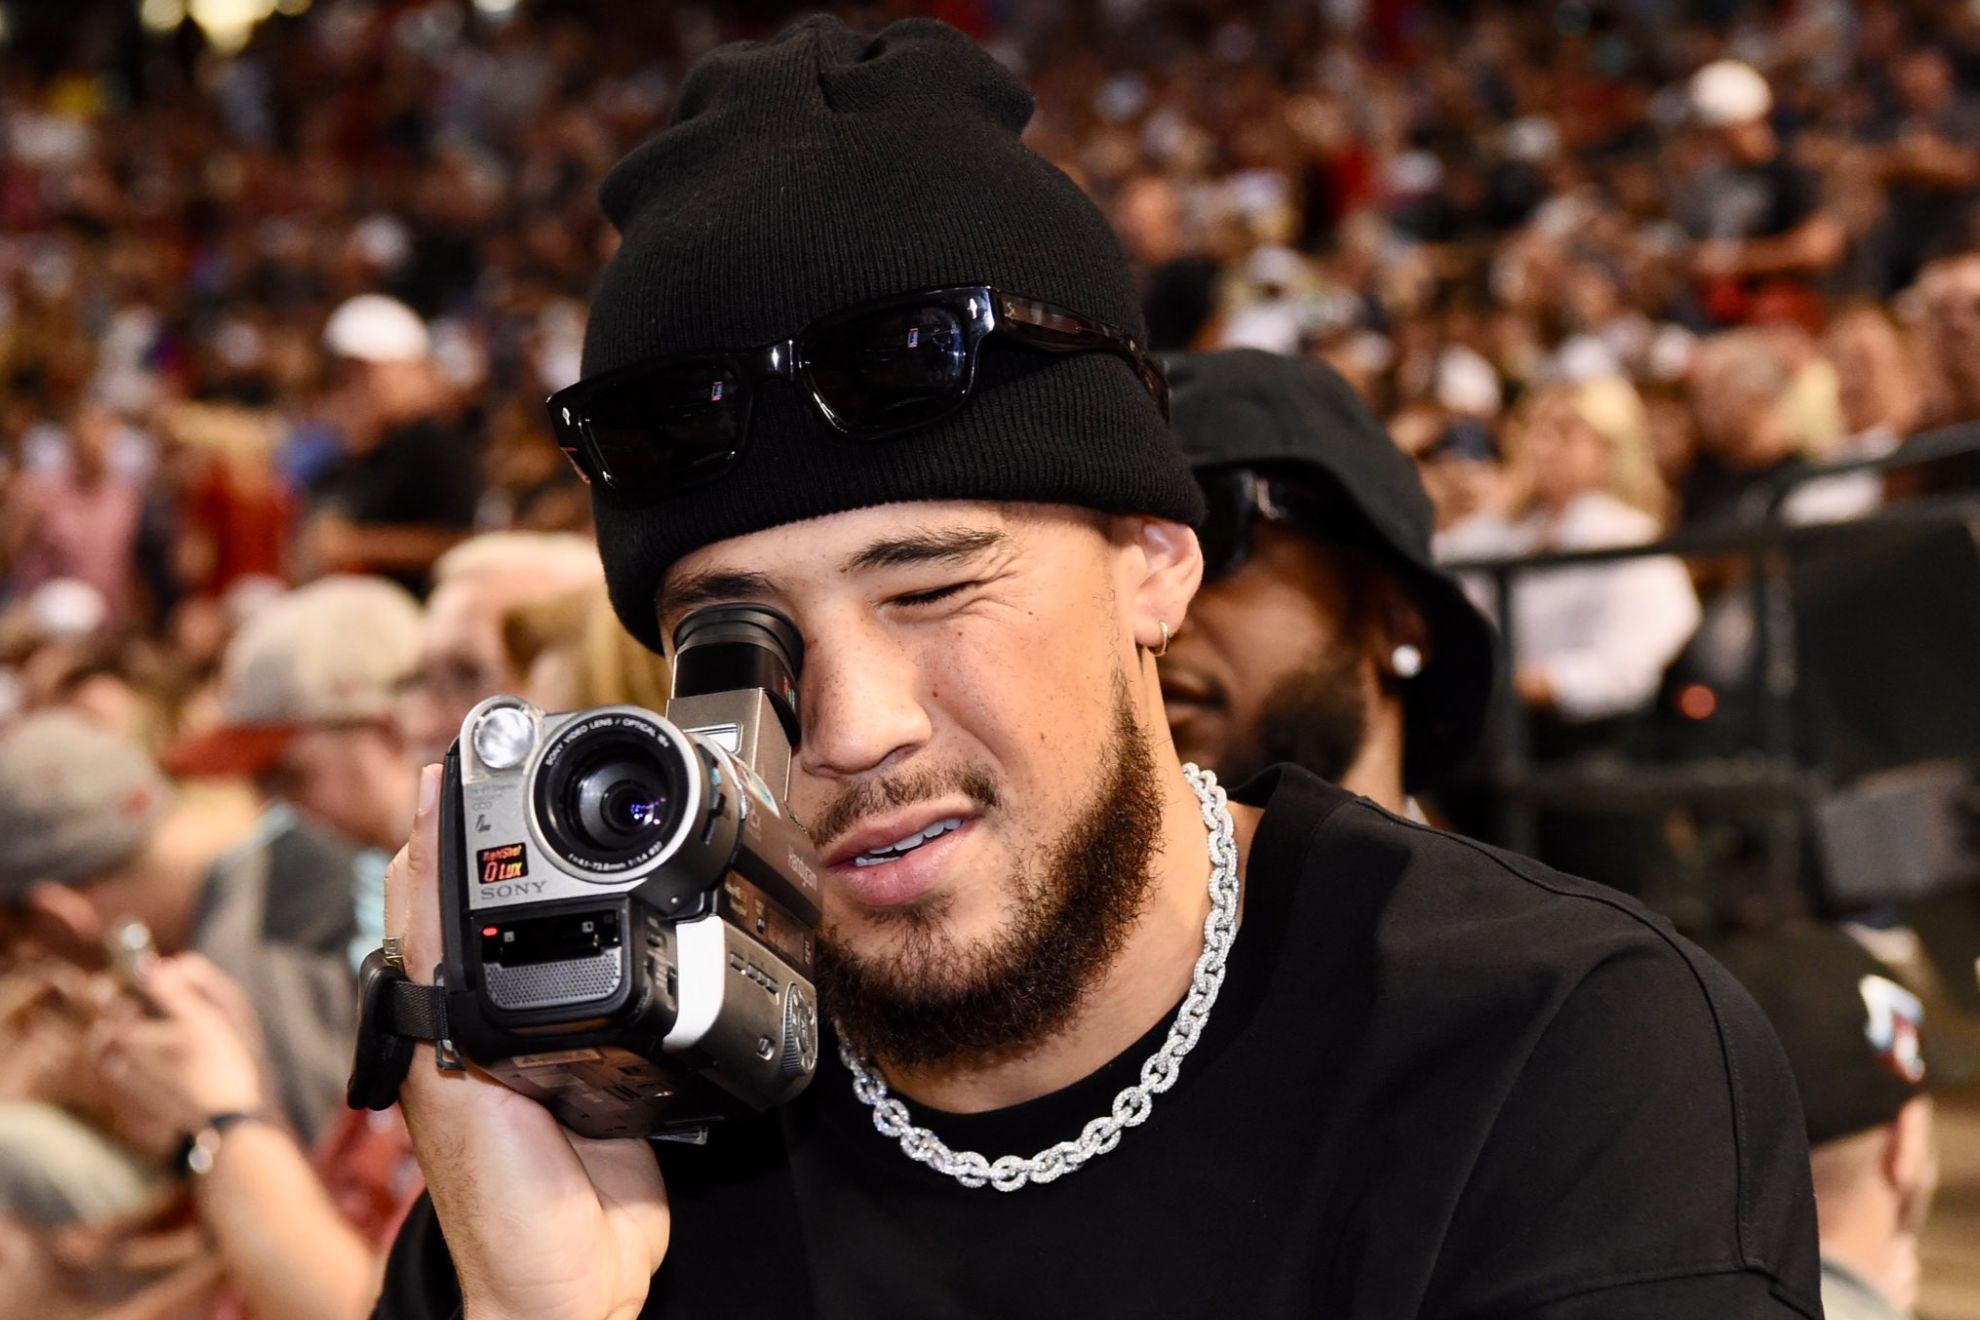 Devin Booker channels inner Shaq with vintage camcorder during D-Backs vs. Phillies